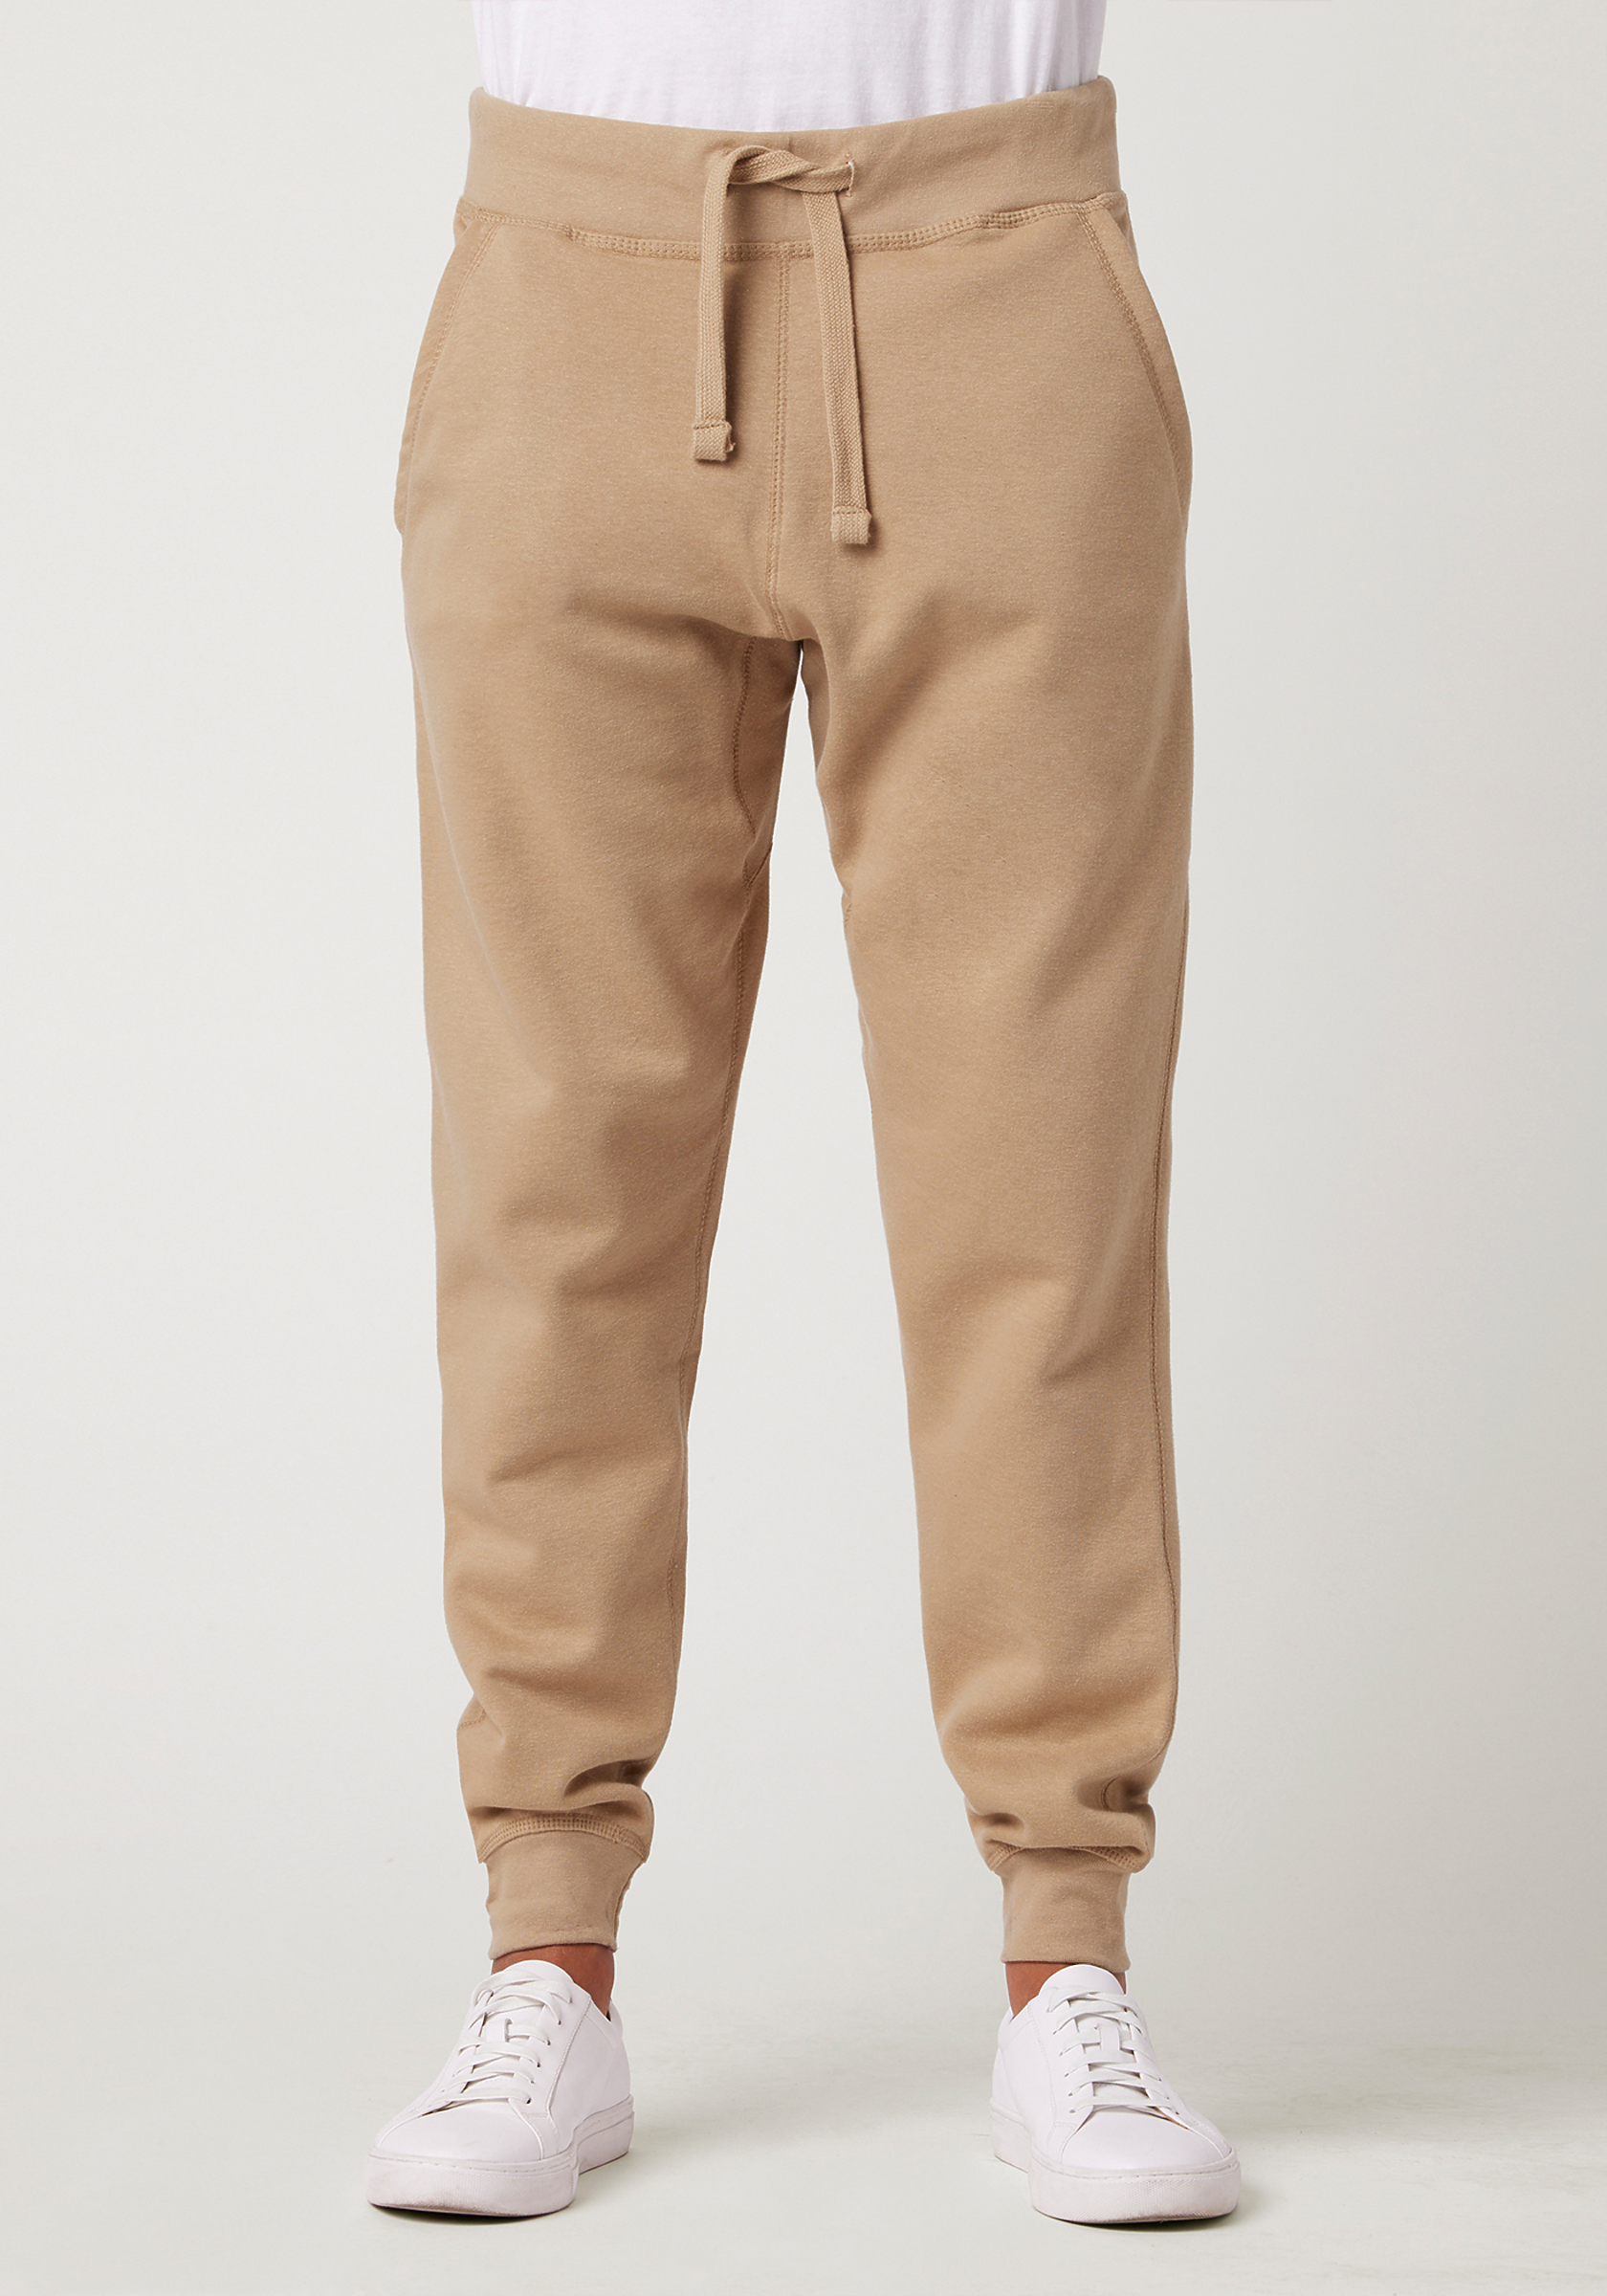 Joggers at Cotton Traders